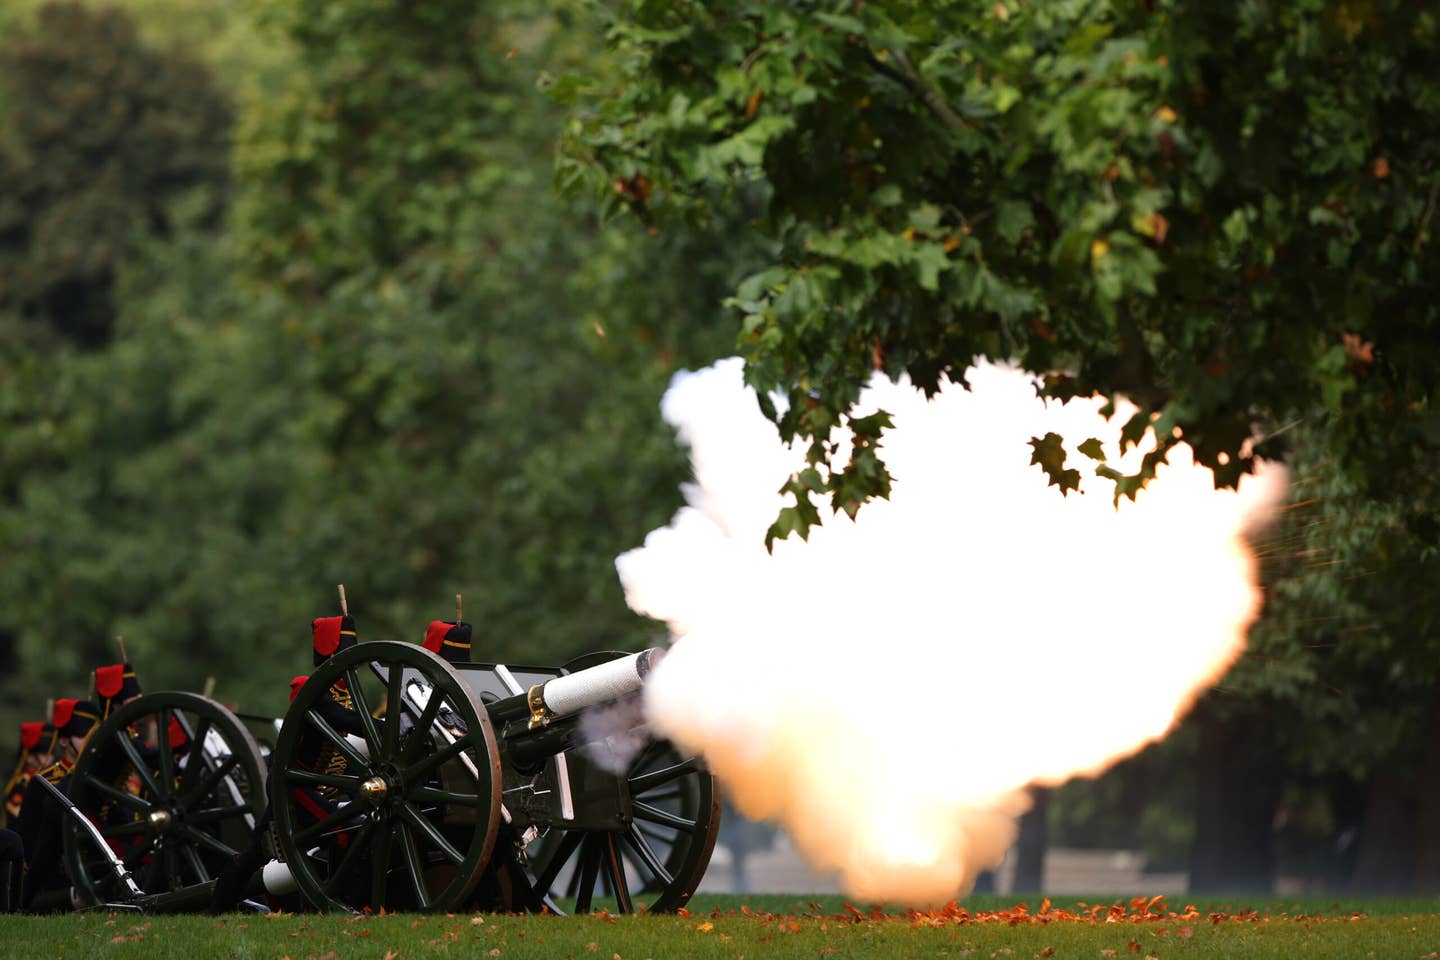 The King's Troop Royal Horse Artillery fired a 96-gun salute at 1 p.m. London time in tribute to the late Queen Elizabeth II at Hyde Park today. (Photo by Dan Kitwood/Getty Images)